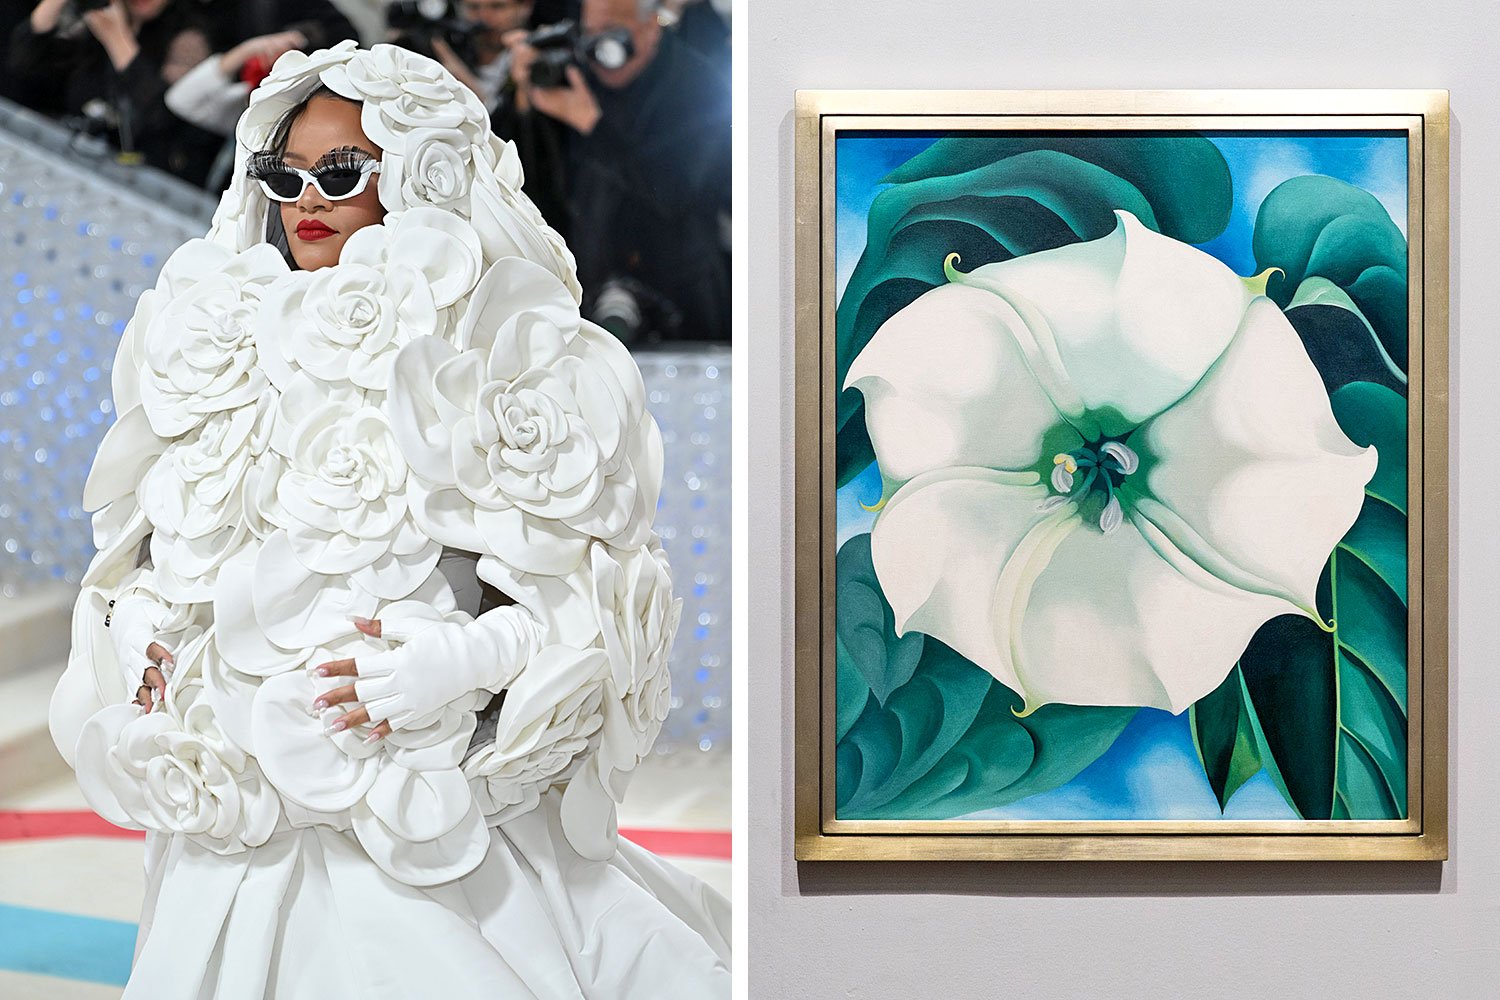 Karl Lagerfeld: A Line of Beauty at the Met Museum - StyleZeitgeist